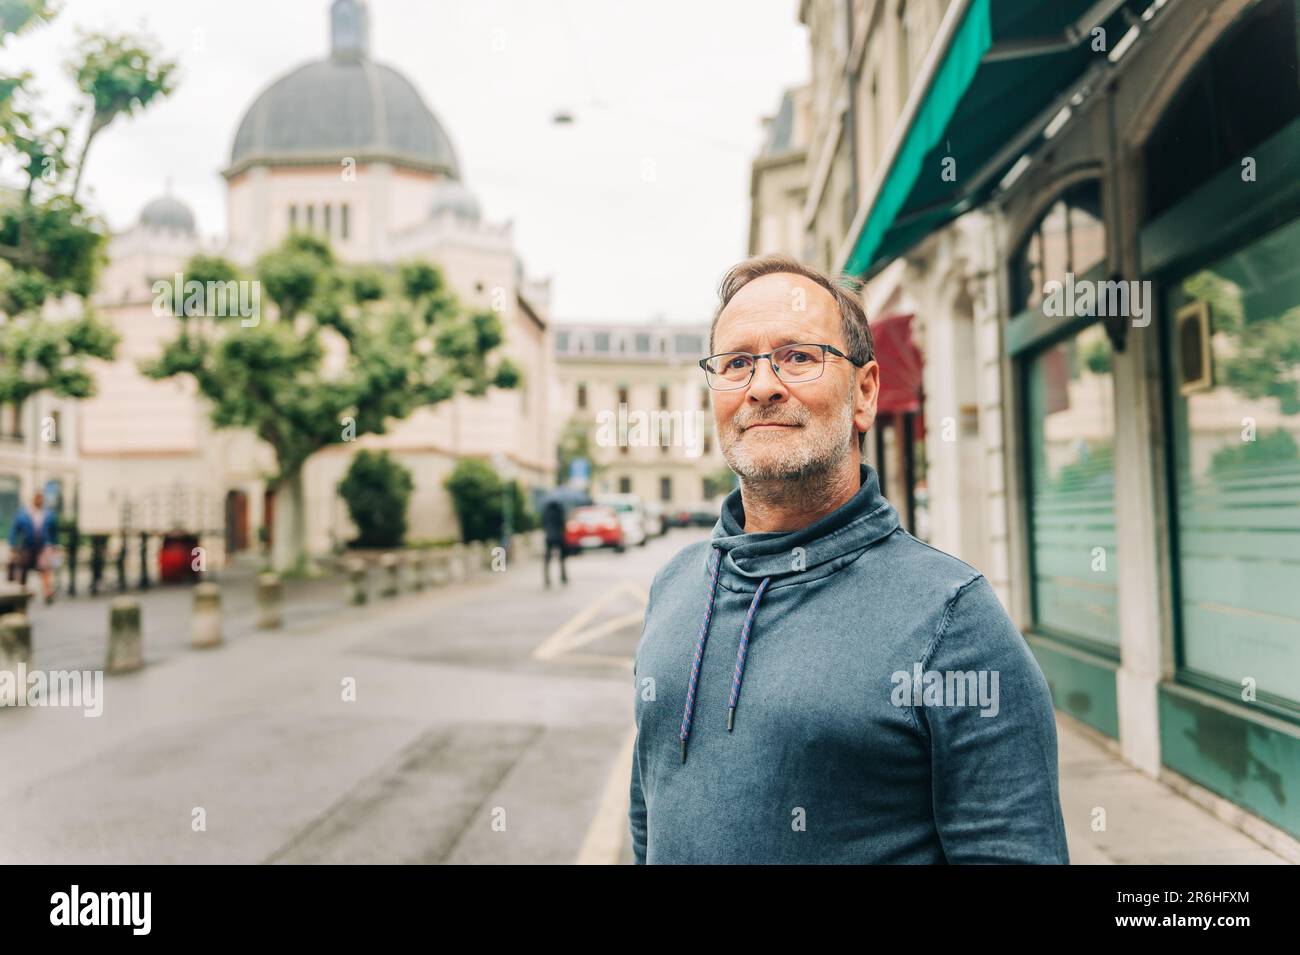 Outdoor portrait of middle age man on city street, wearing eyeglasses and blue sweatshirt Stock Photo